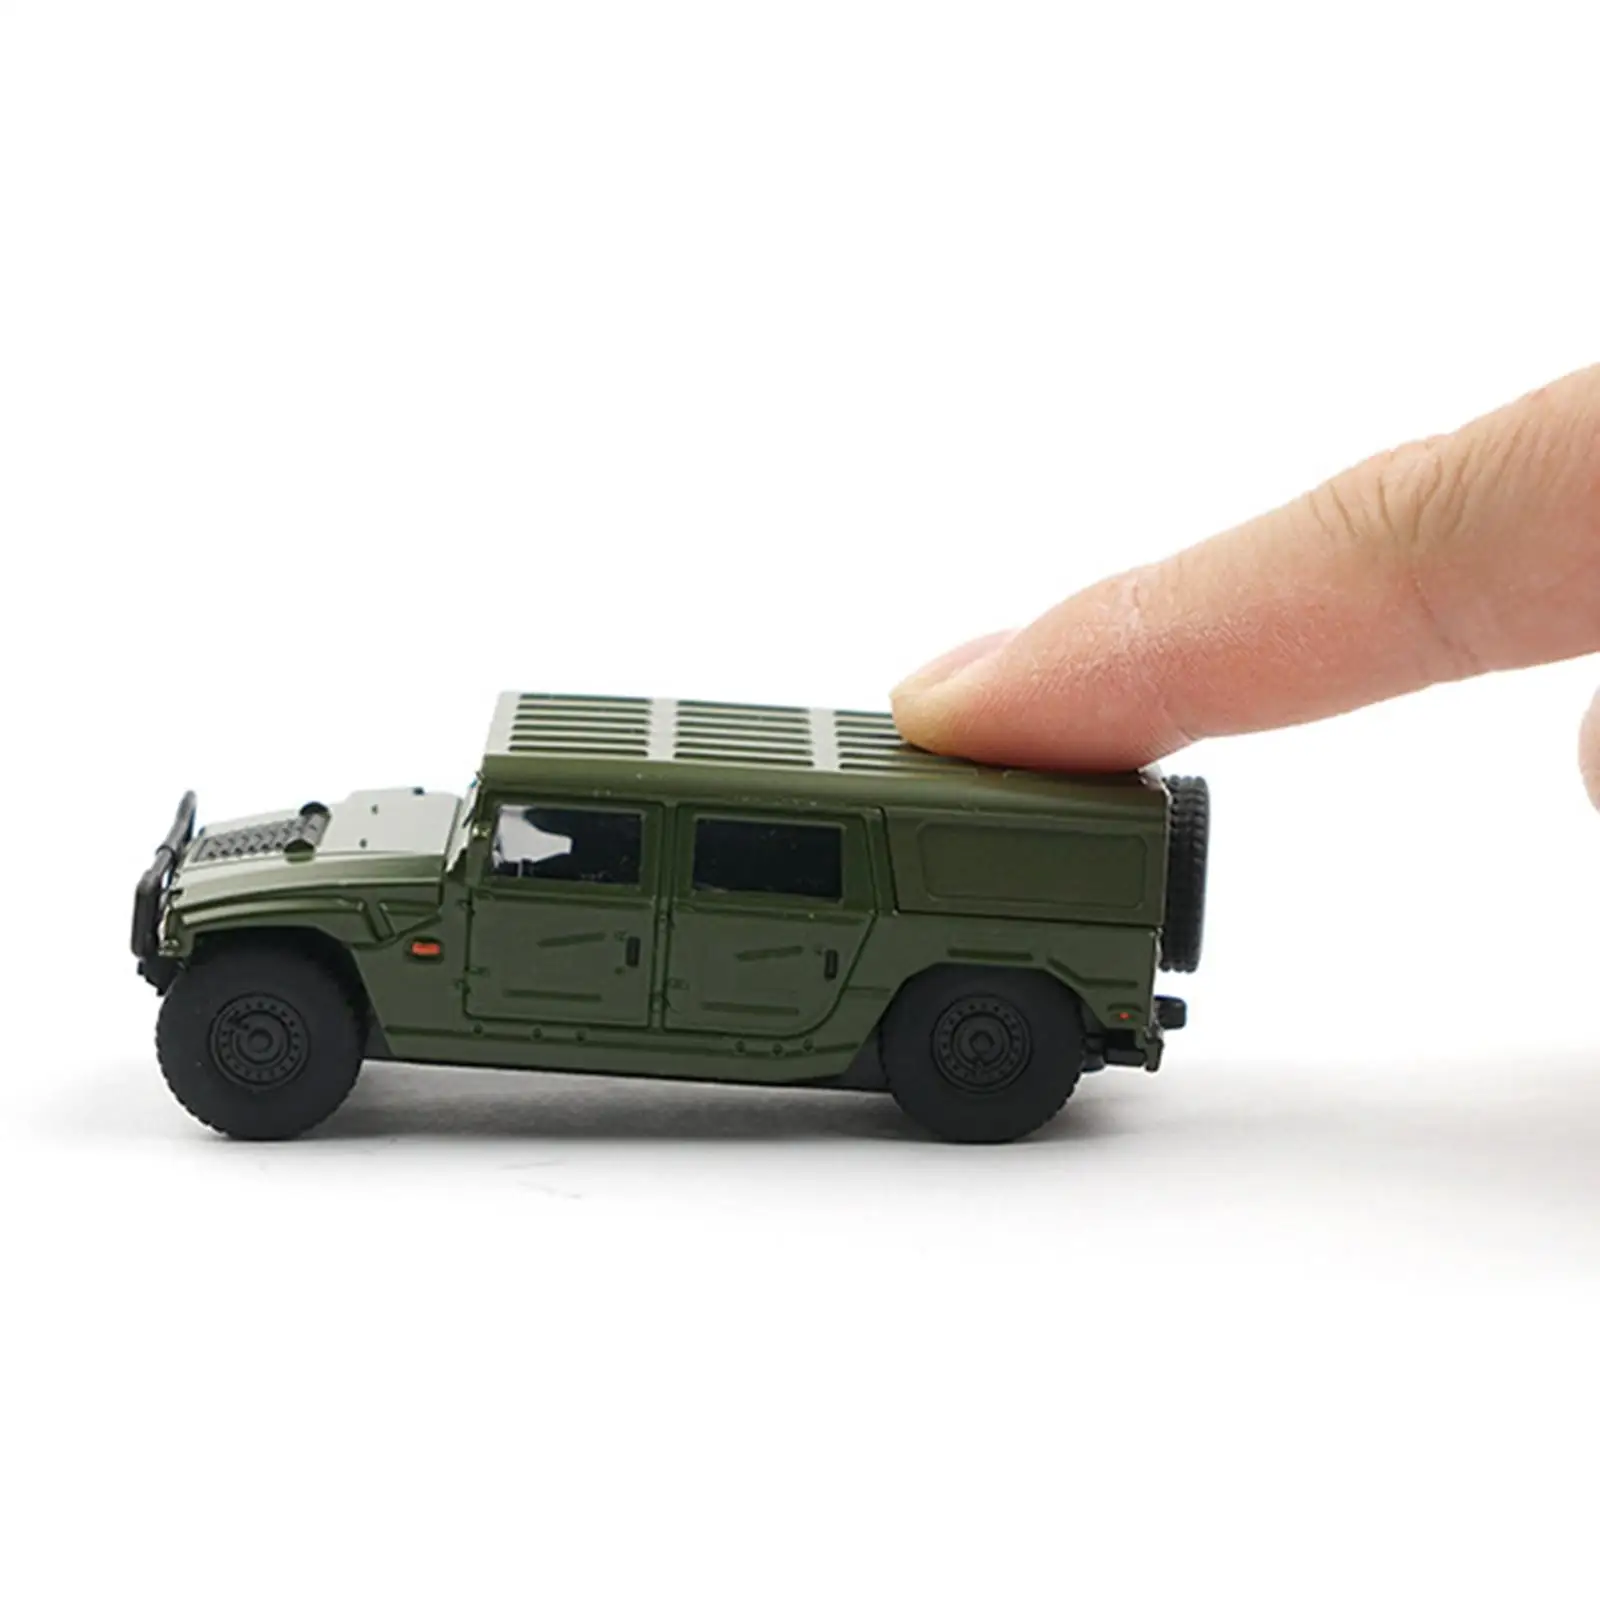 1/64 Miniature Car Toys Children Gifts Simulation Collectibles for Scenery Landscape Photography Props Diorama Layout Decoration